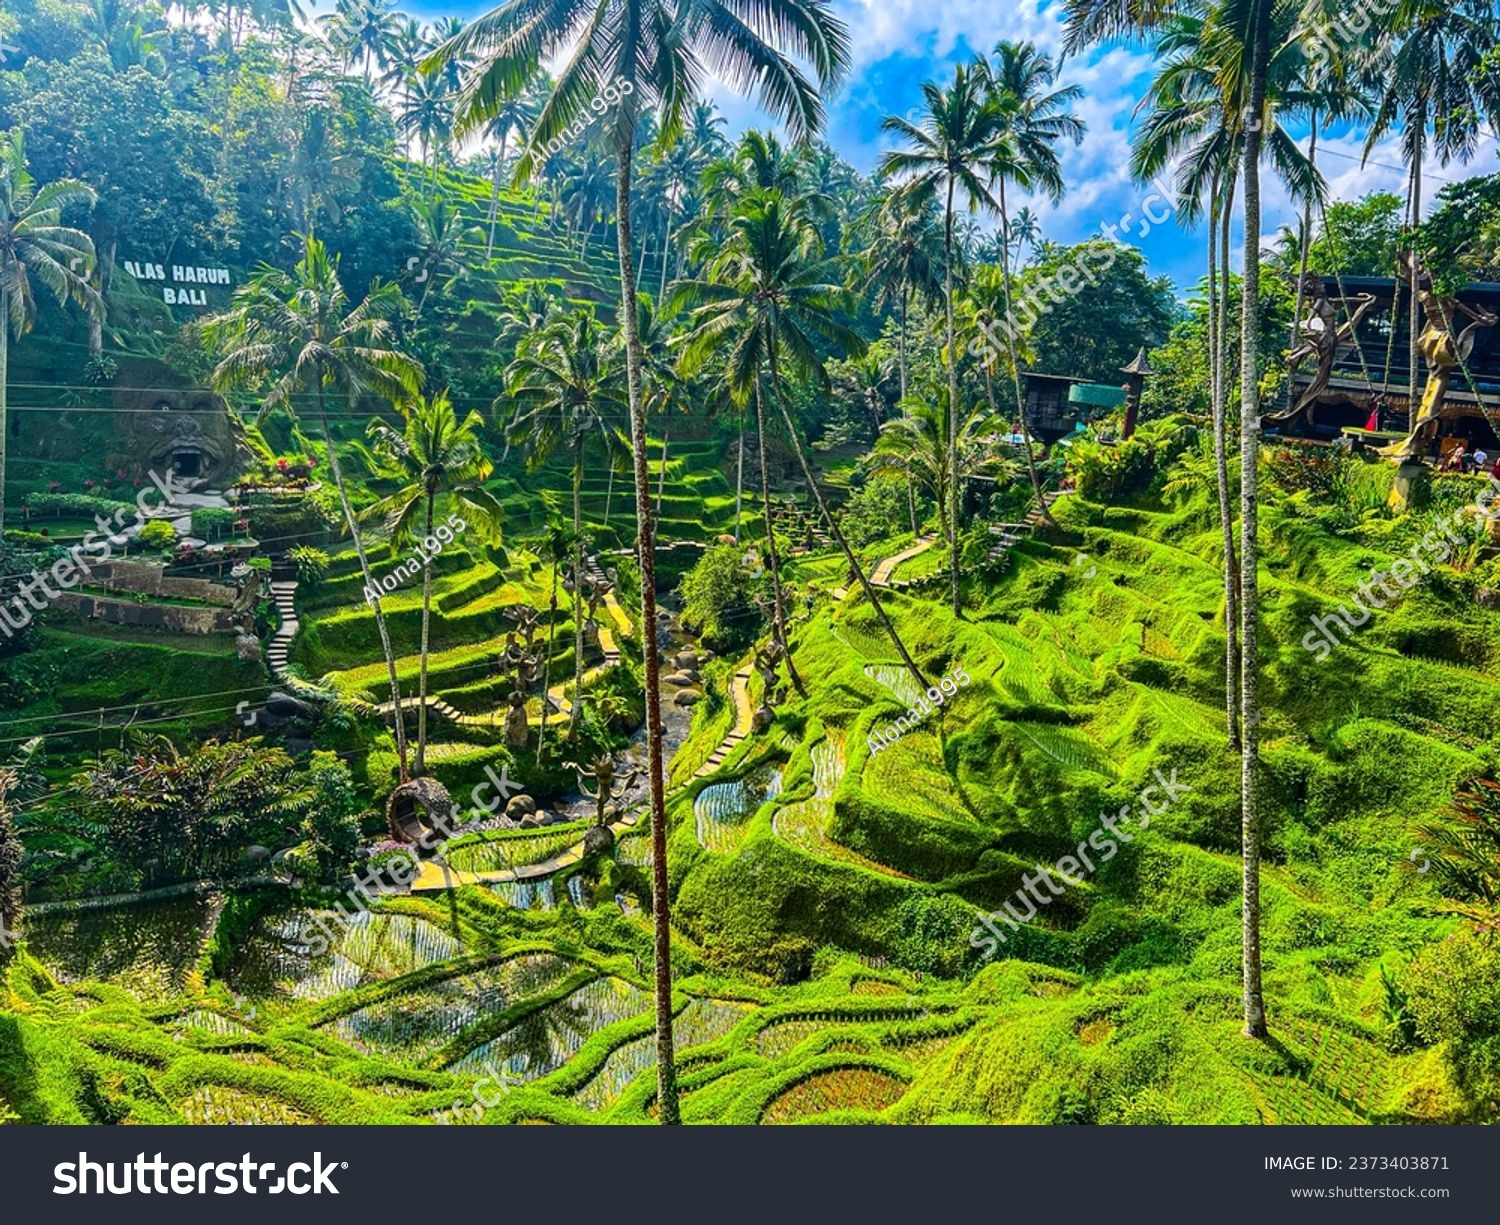 Ceking Rice Terrace (Tegalalang Rice Terrace), Ubud, Bali, Indonesia, October 2023
Top aerial view of spectacular and beautiful rice terraces and palm trees  #2373403871